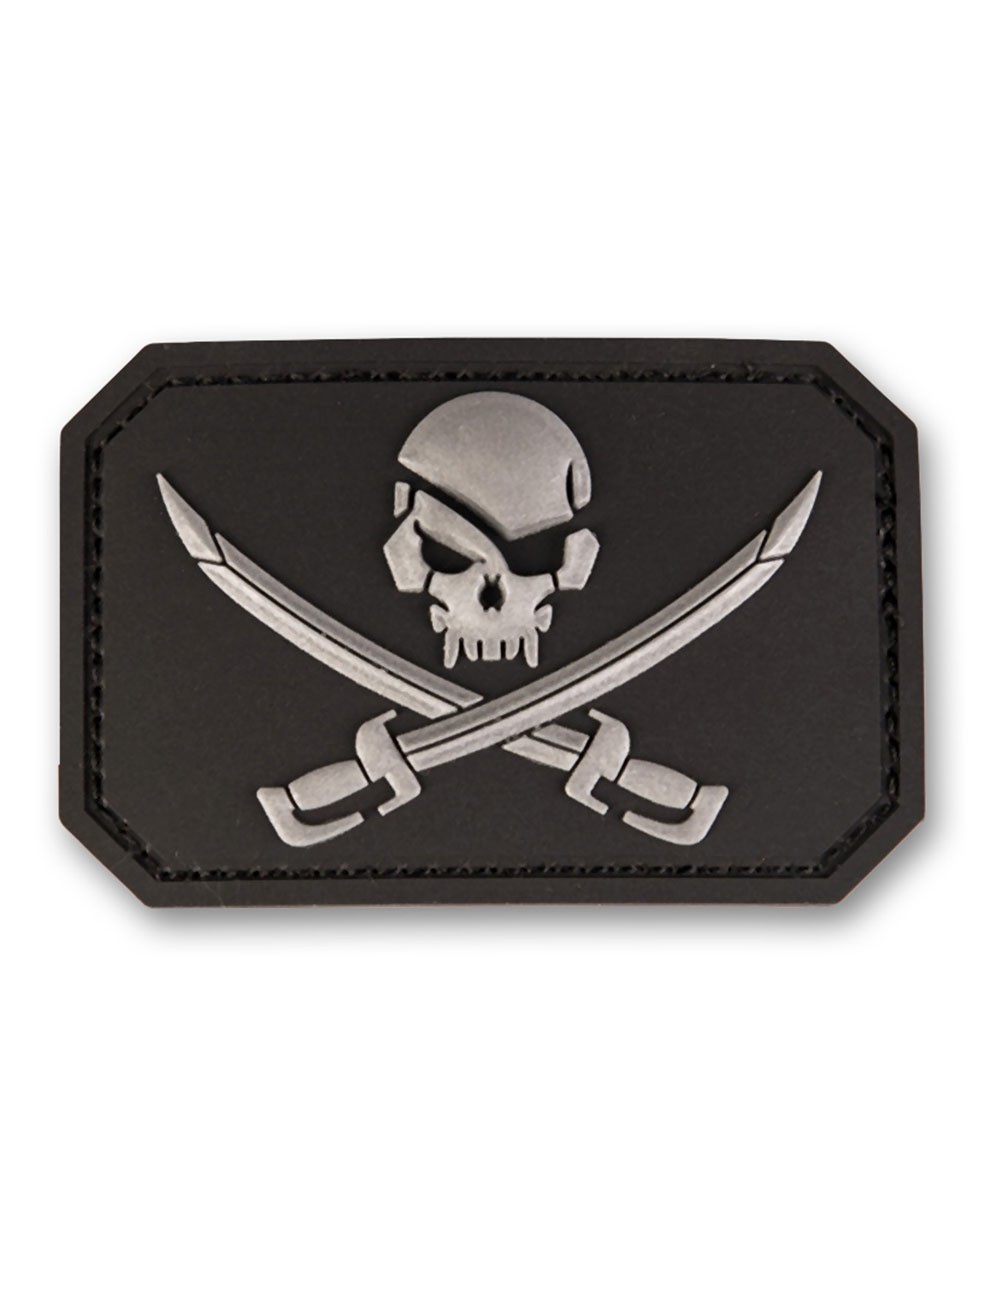 Pirate 3D Patch PVC 16832202 Swords Sale Roger Skull With Jolly